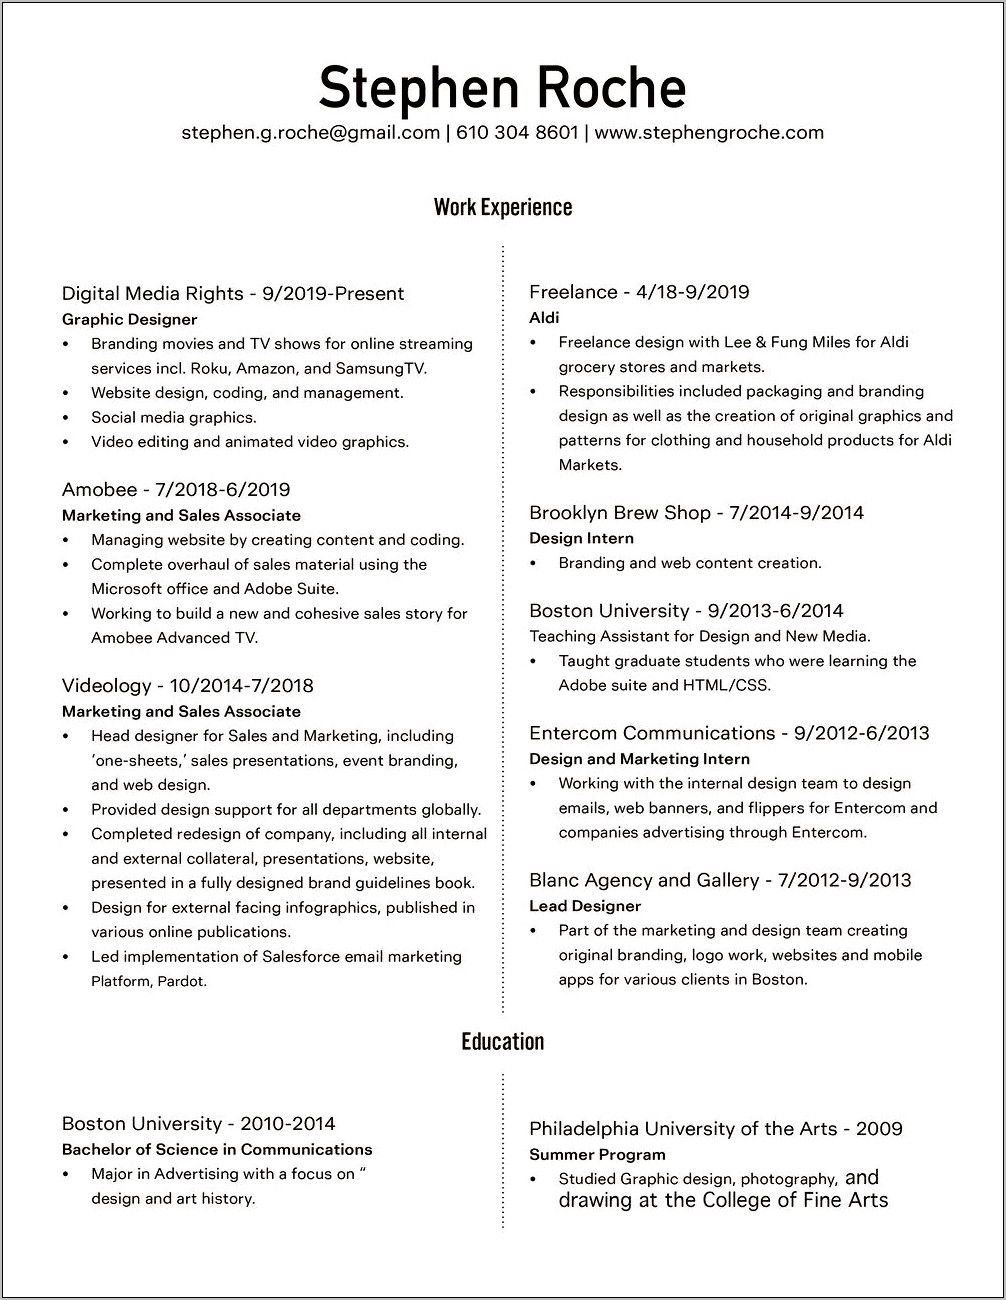 Resume For Assitant Manager At Aldi